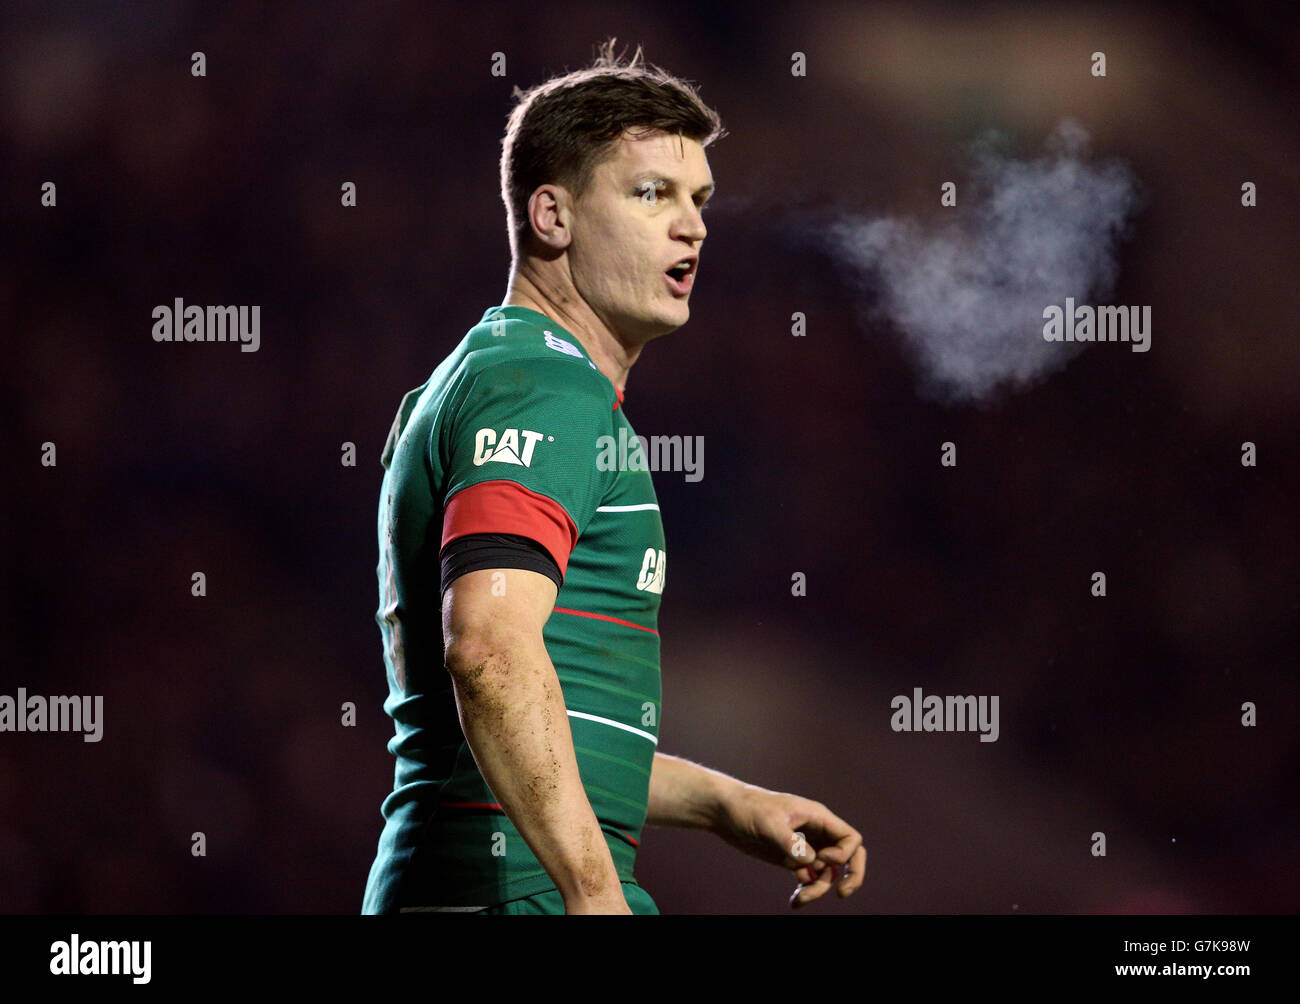 Rugby Union - European Rugby Champions Cup - Pool 3 - Leicester Tigers / Scarlets - Welford Road. Leicester Tigers Freddie Burns durante la partita European Champions Cup Pool Three a Welford Road, Leicester. Foto Stock